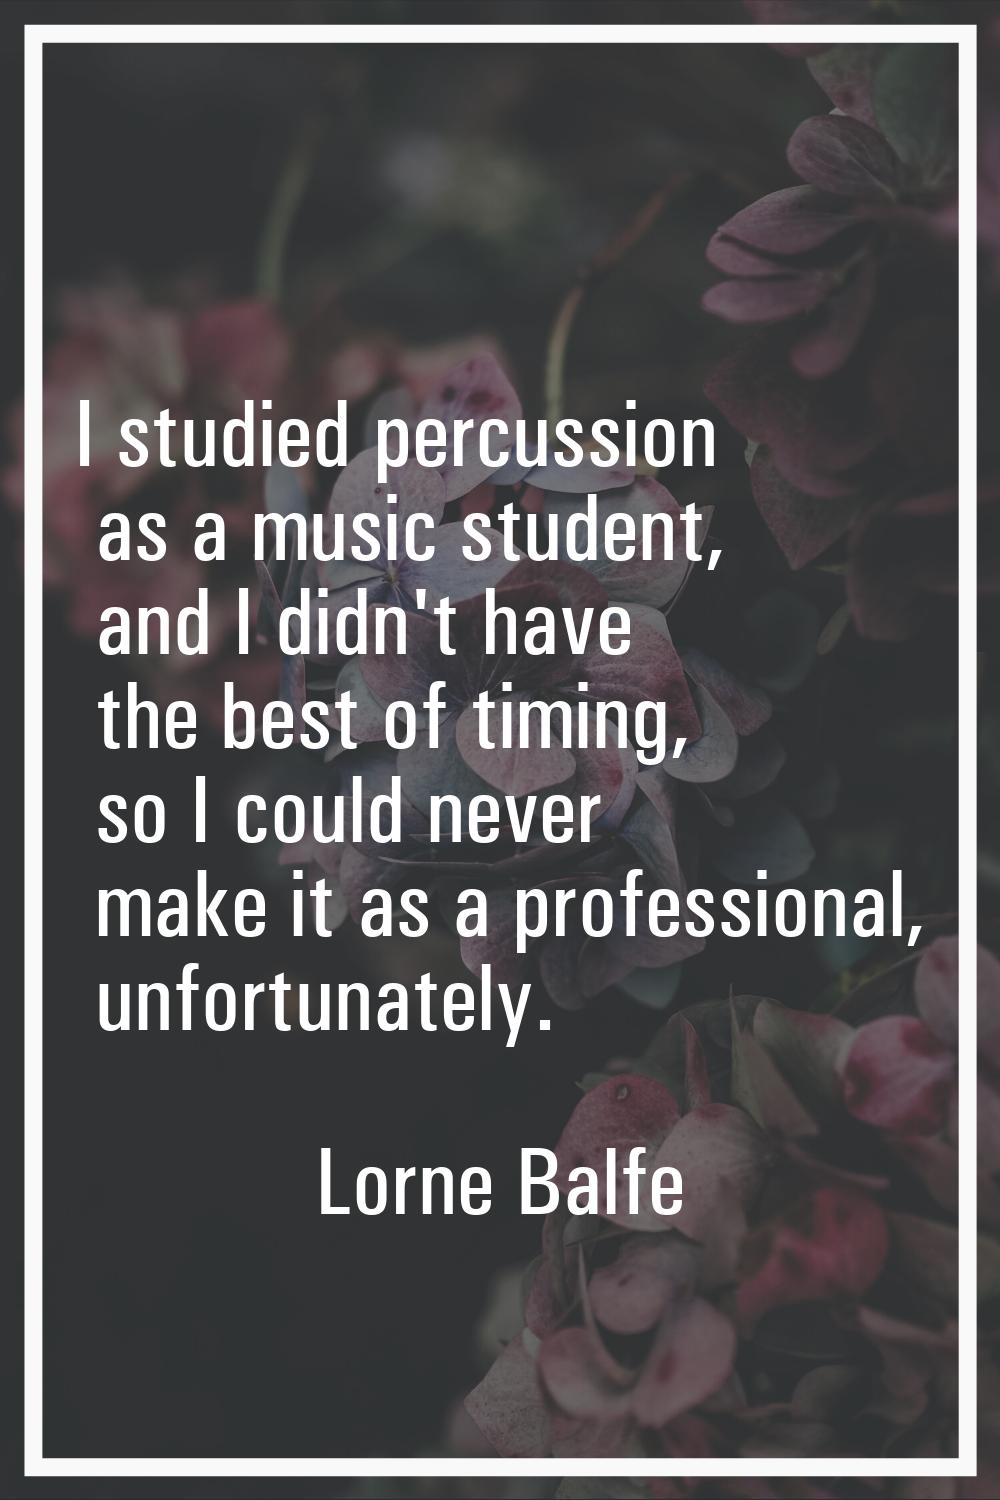 I studied percussion as a music student, and I didn't have the best of timing, so I could never mak